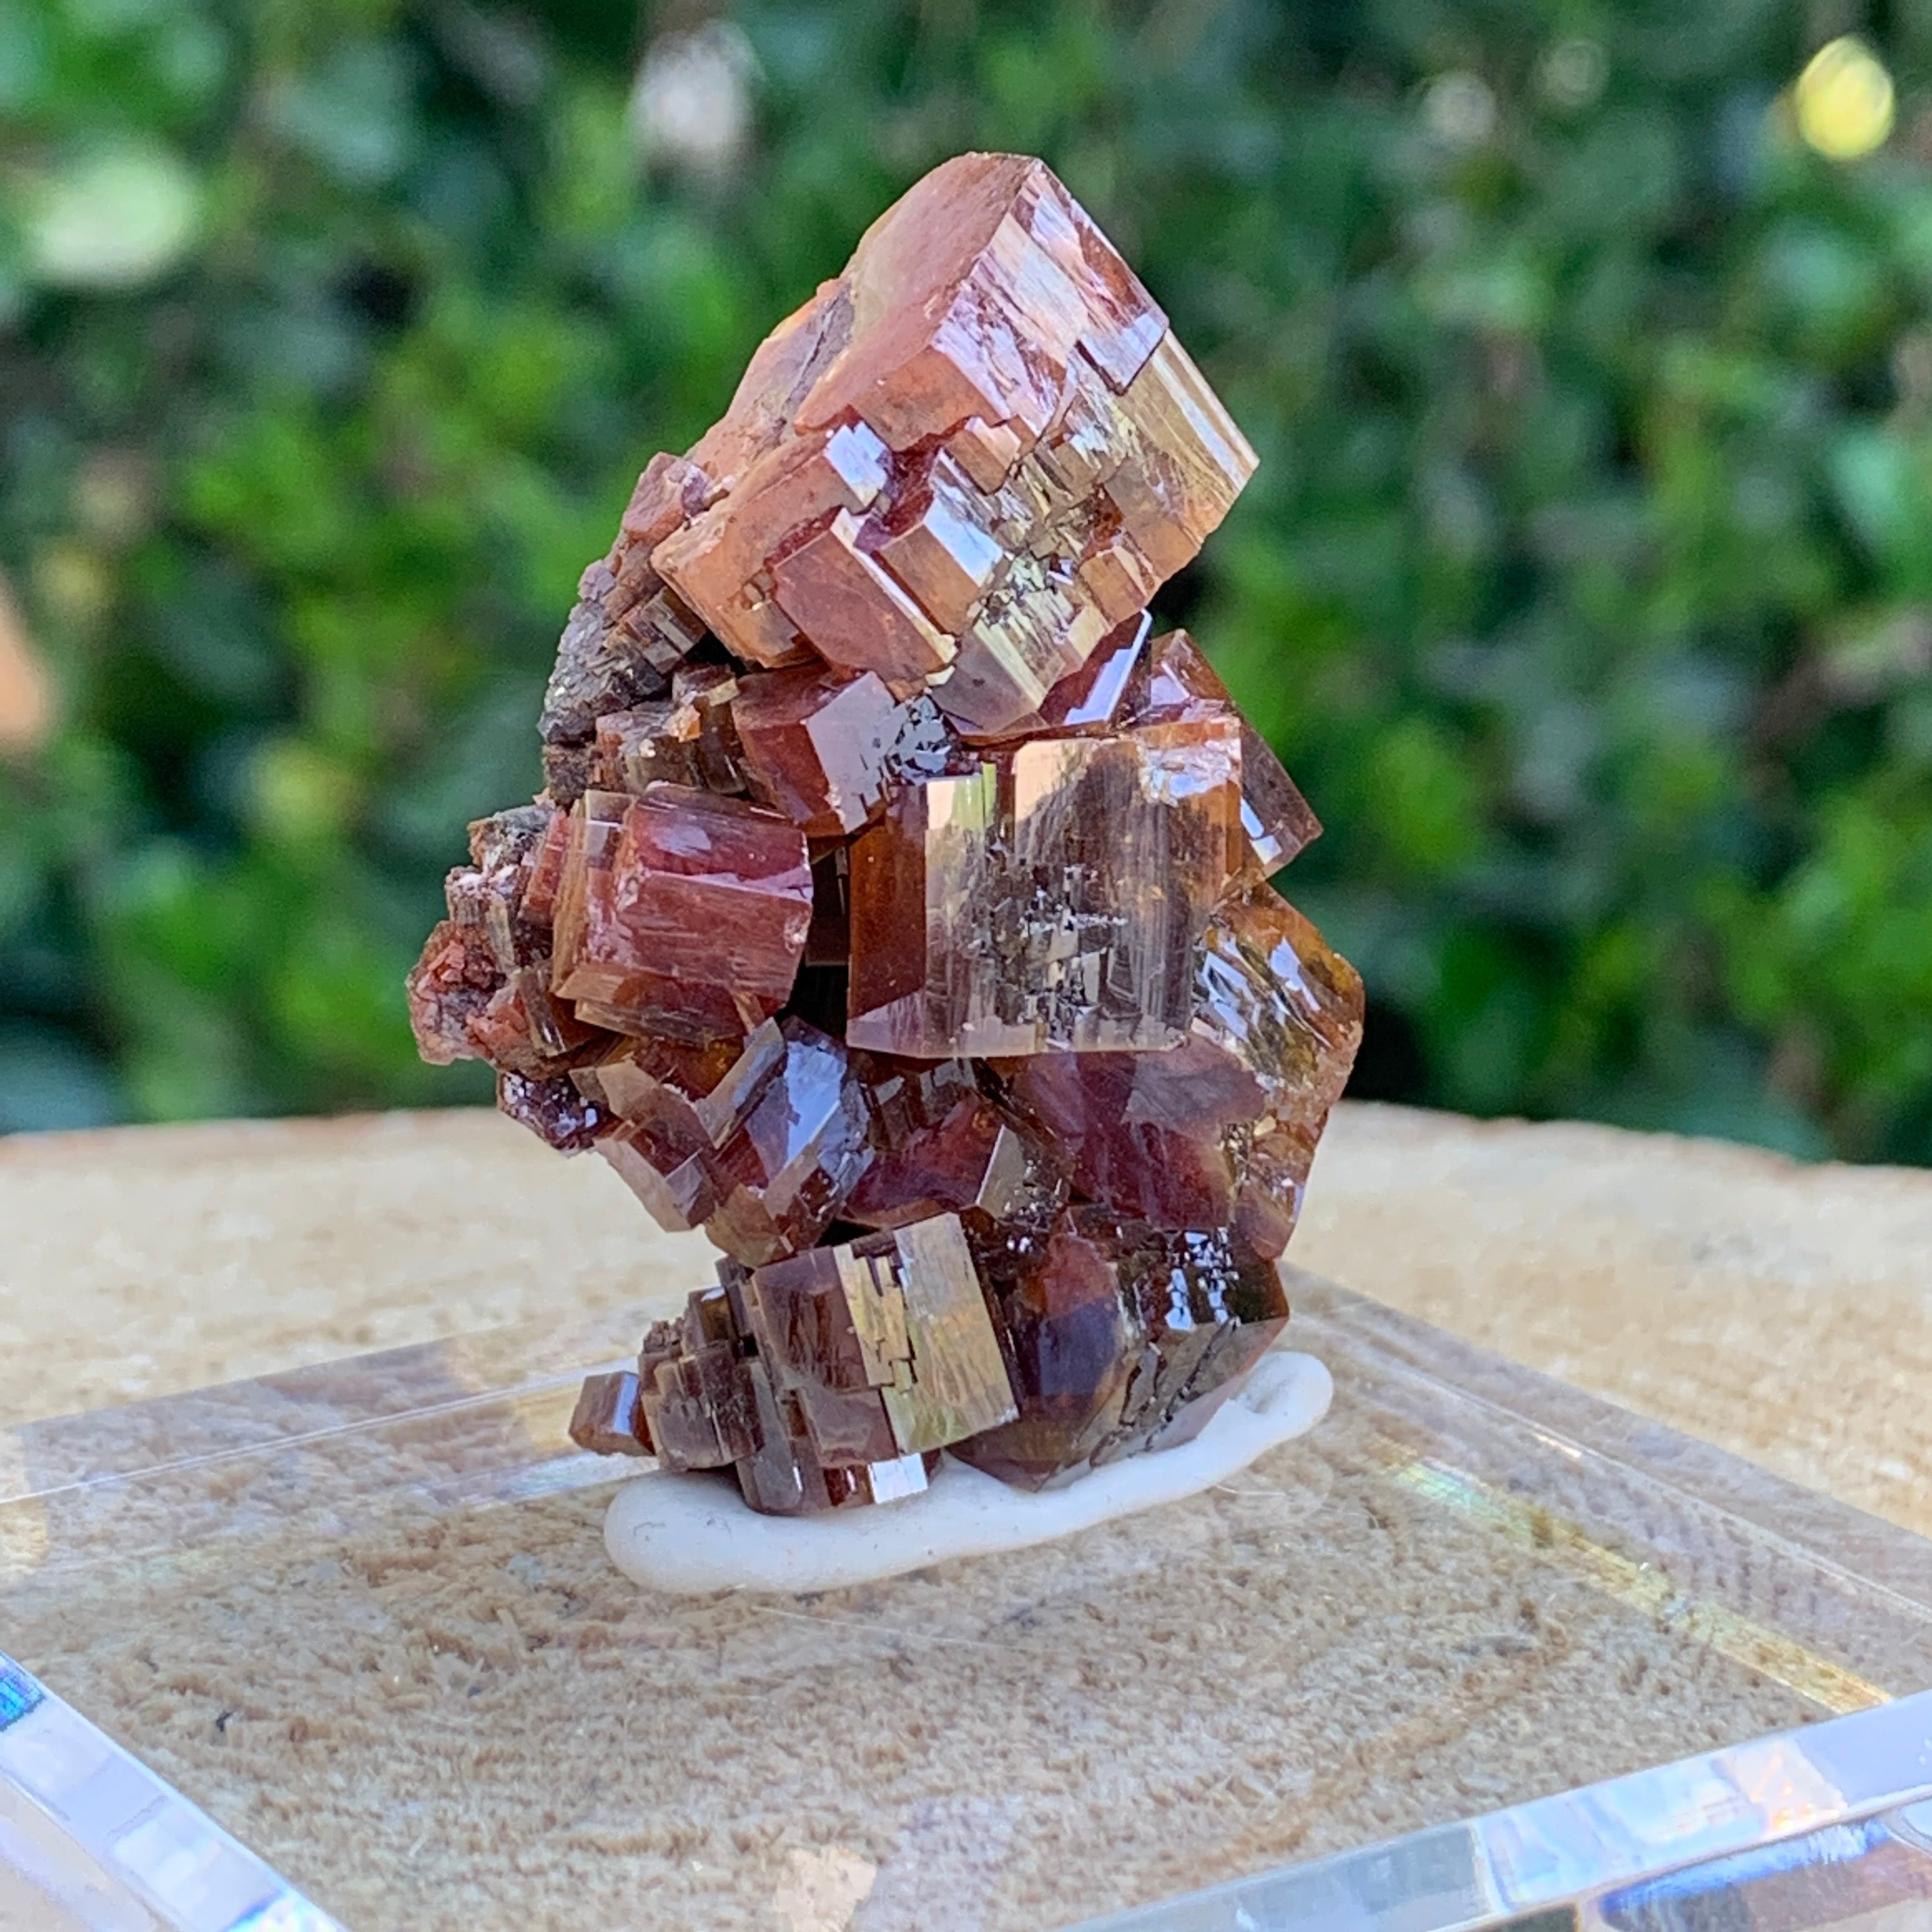 52.5g 4x3x1.5cm Red Vanadinite Nugget from Morocco